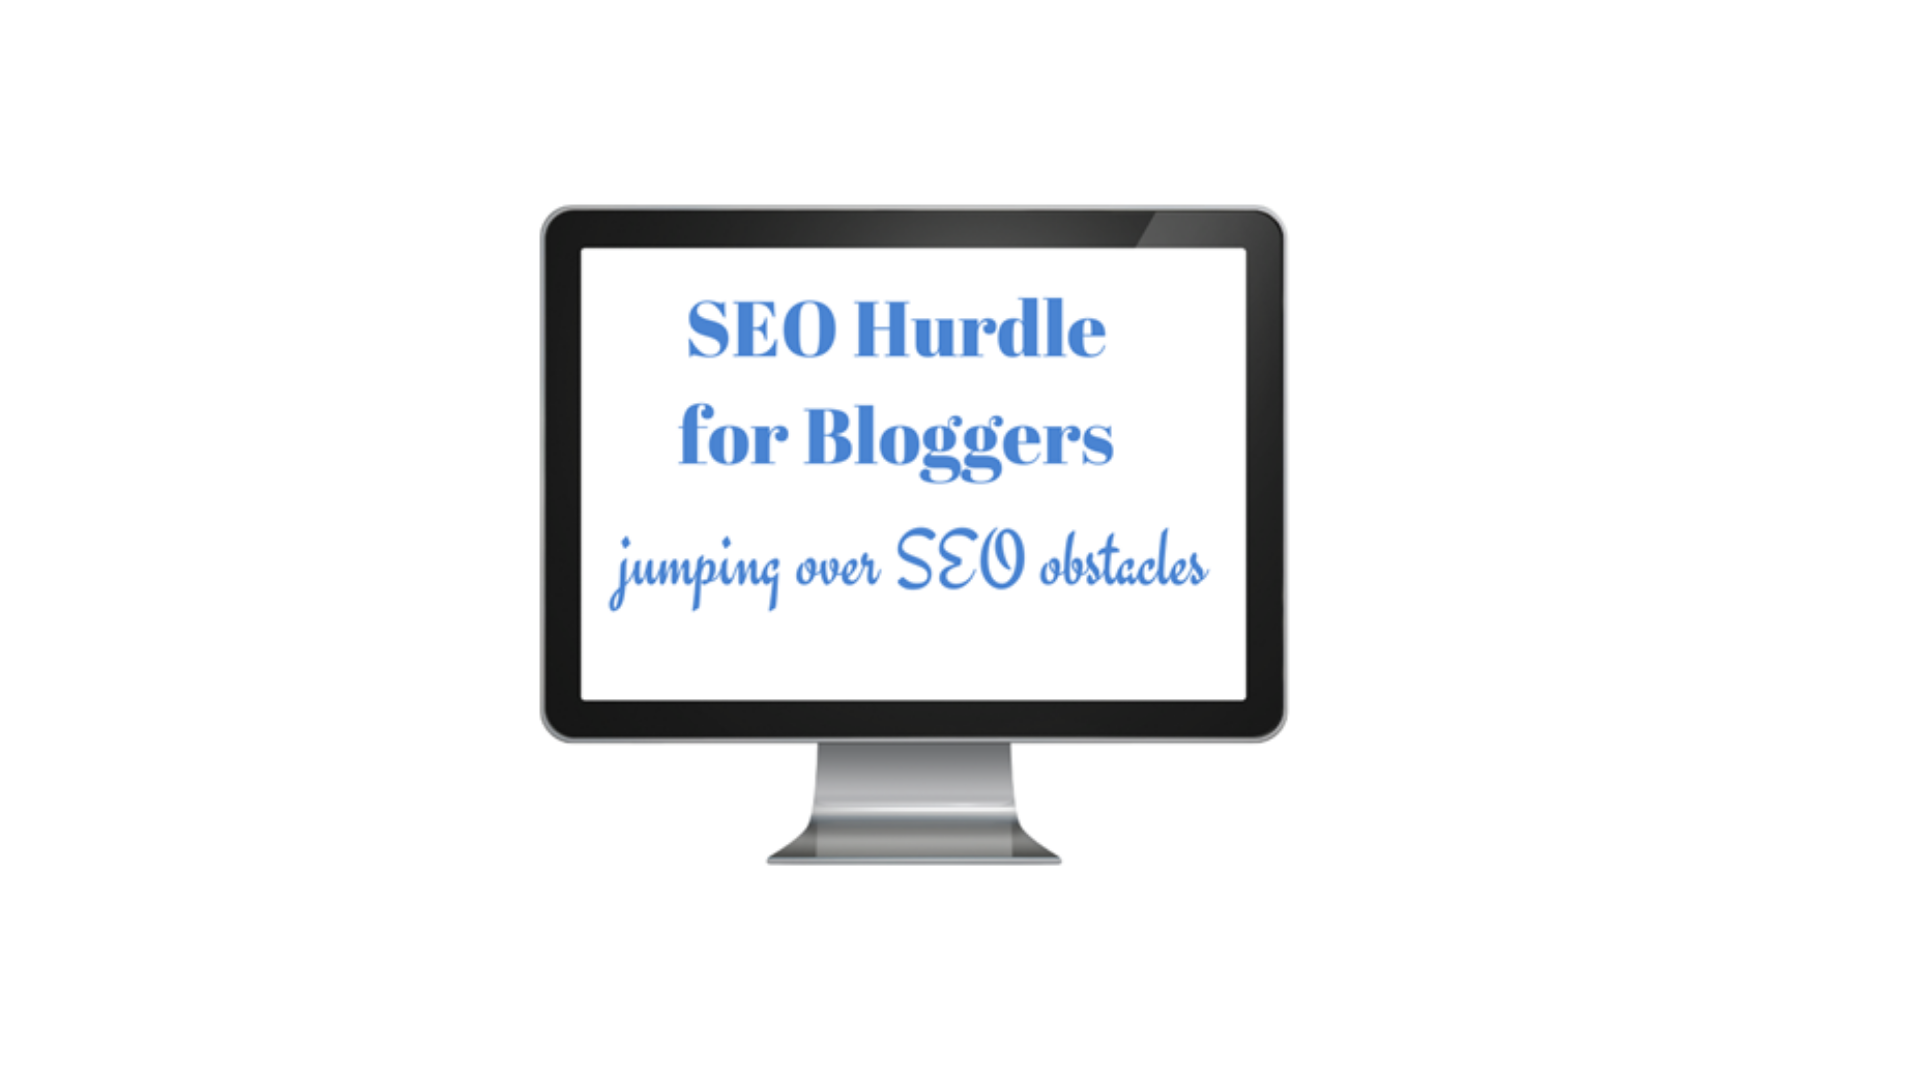 SEO Hurdle Course for Bloggers on a computer screen is also jumping over SEO obstacles 